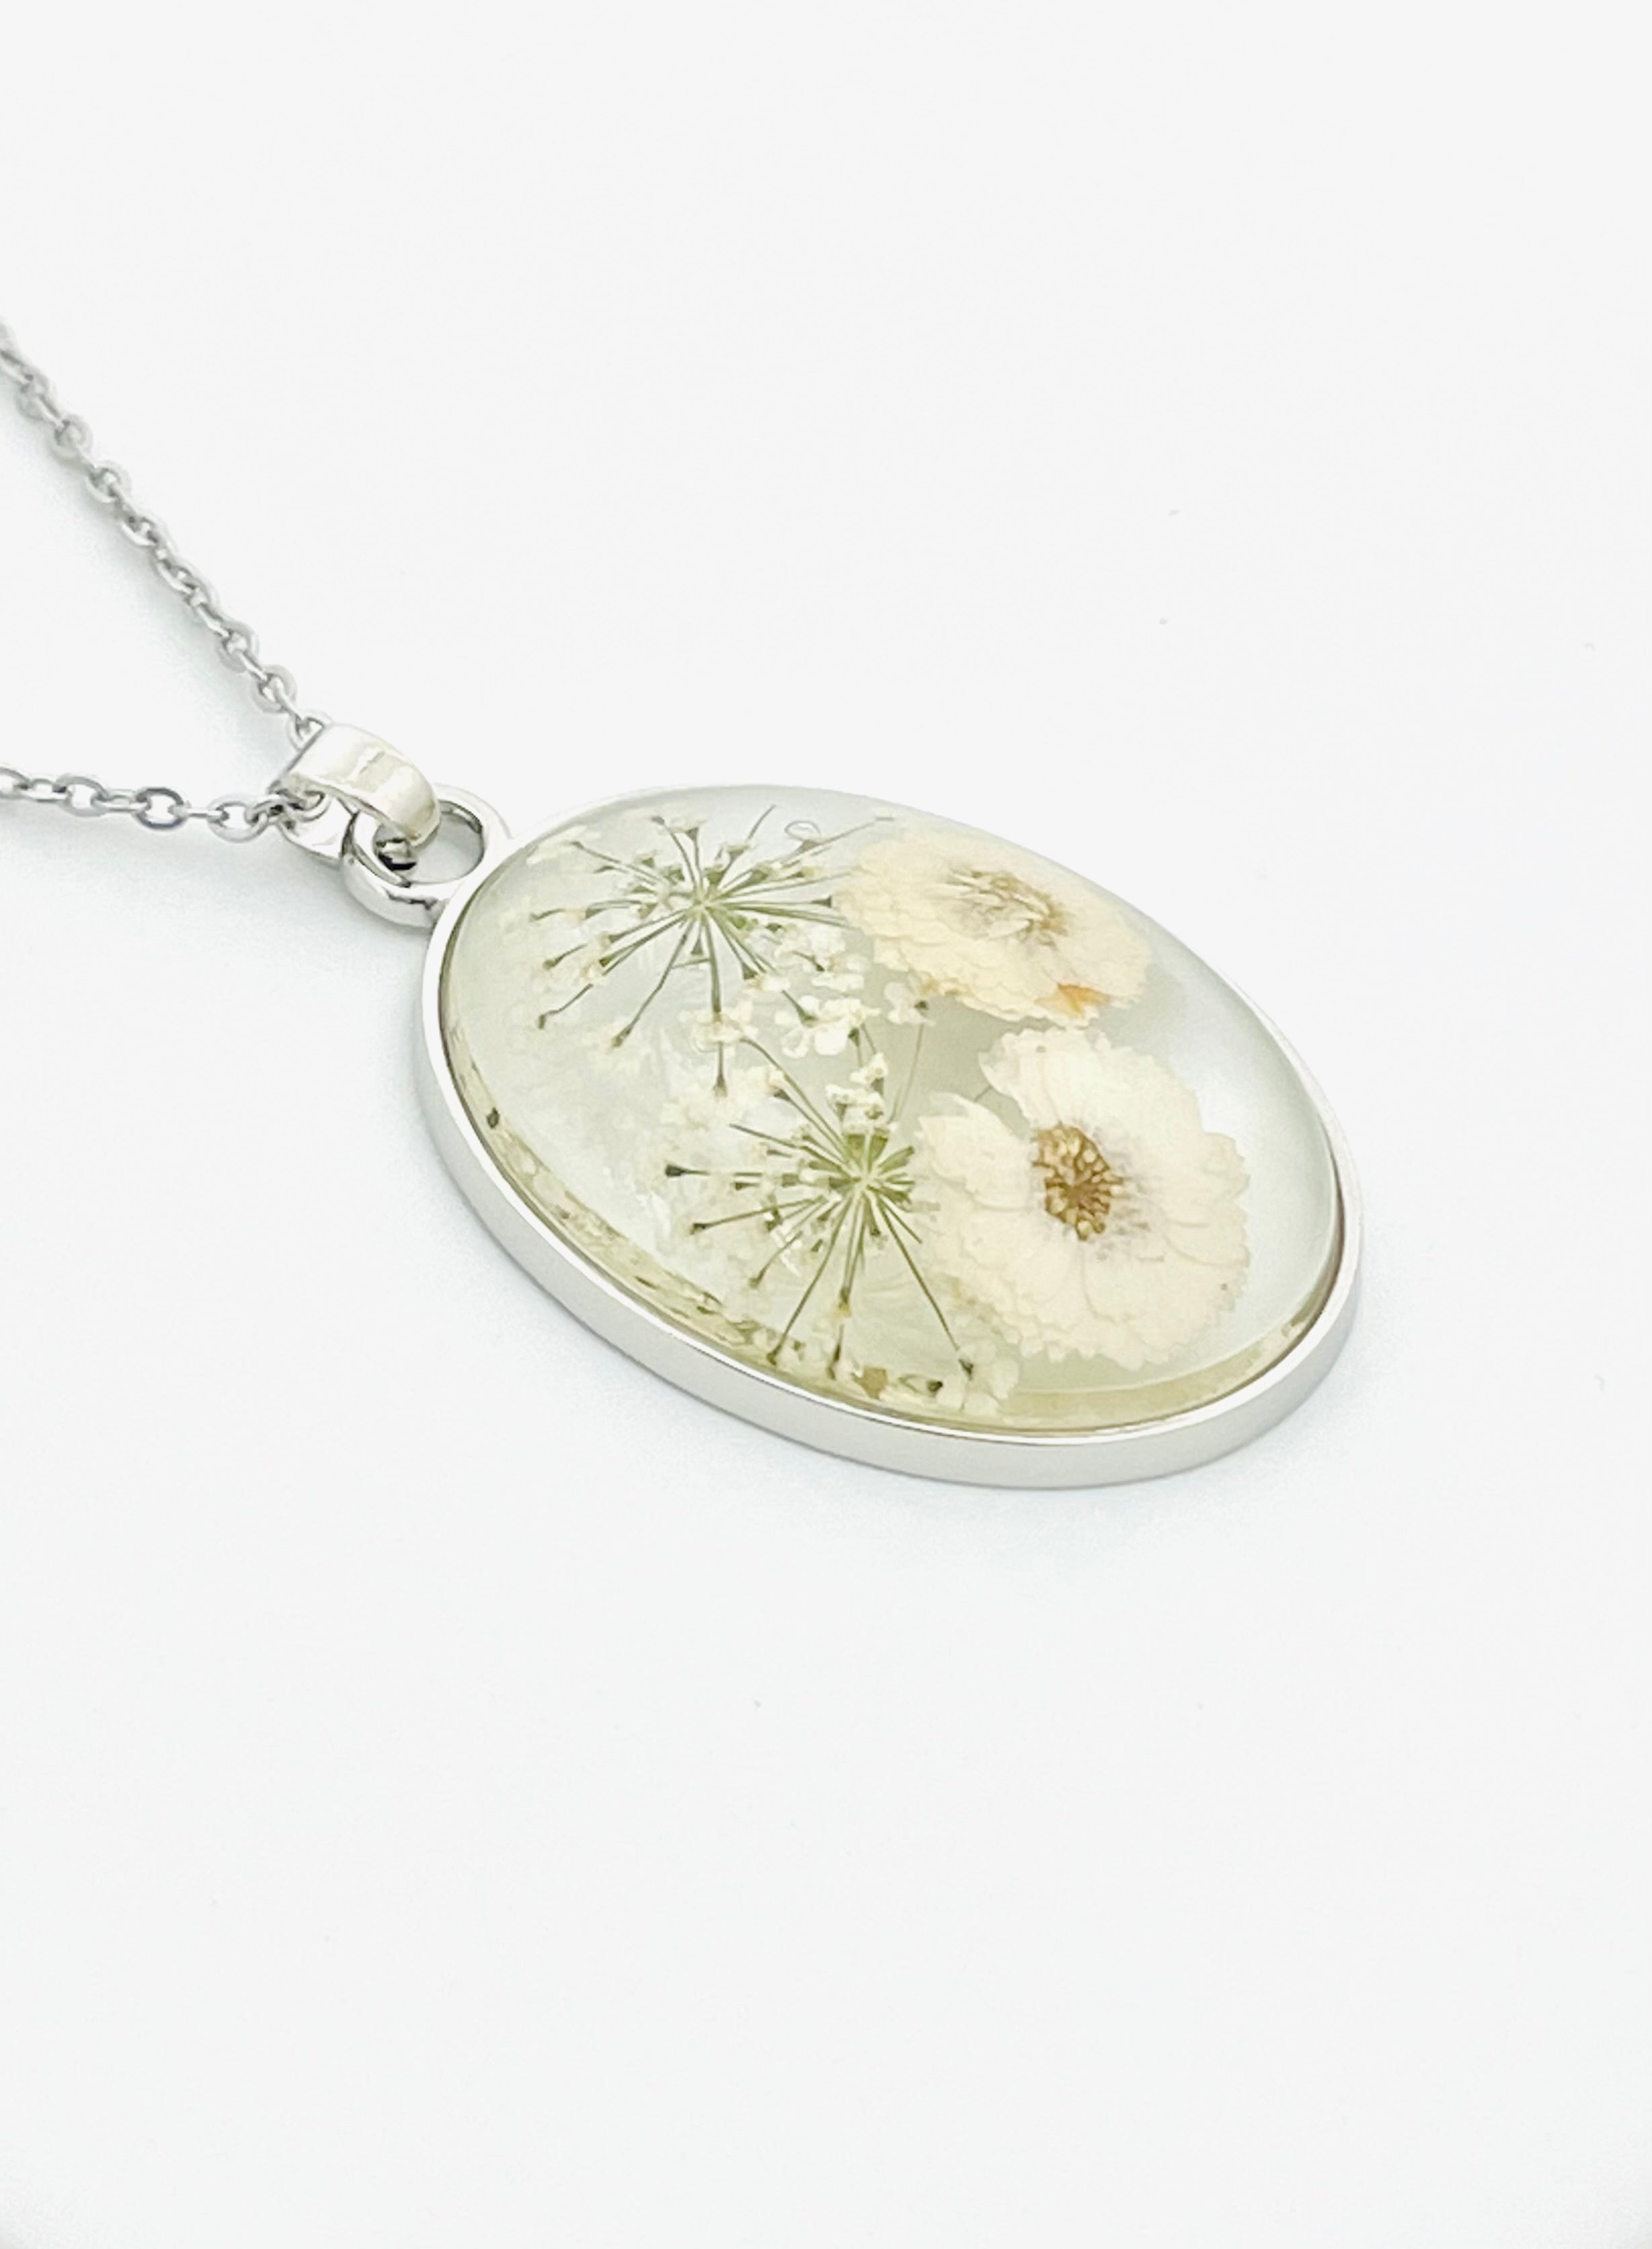 Real Dried Pressed Flower Necklace